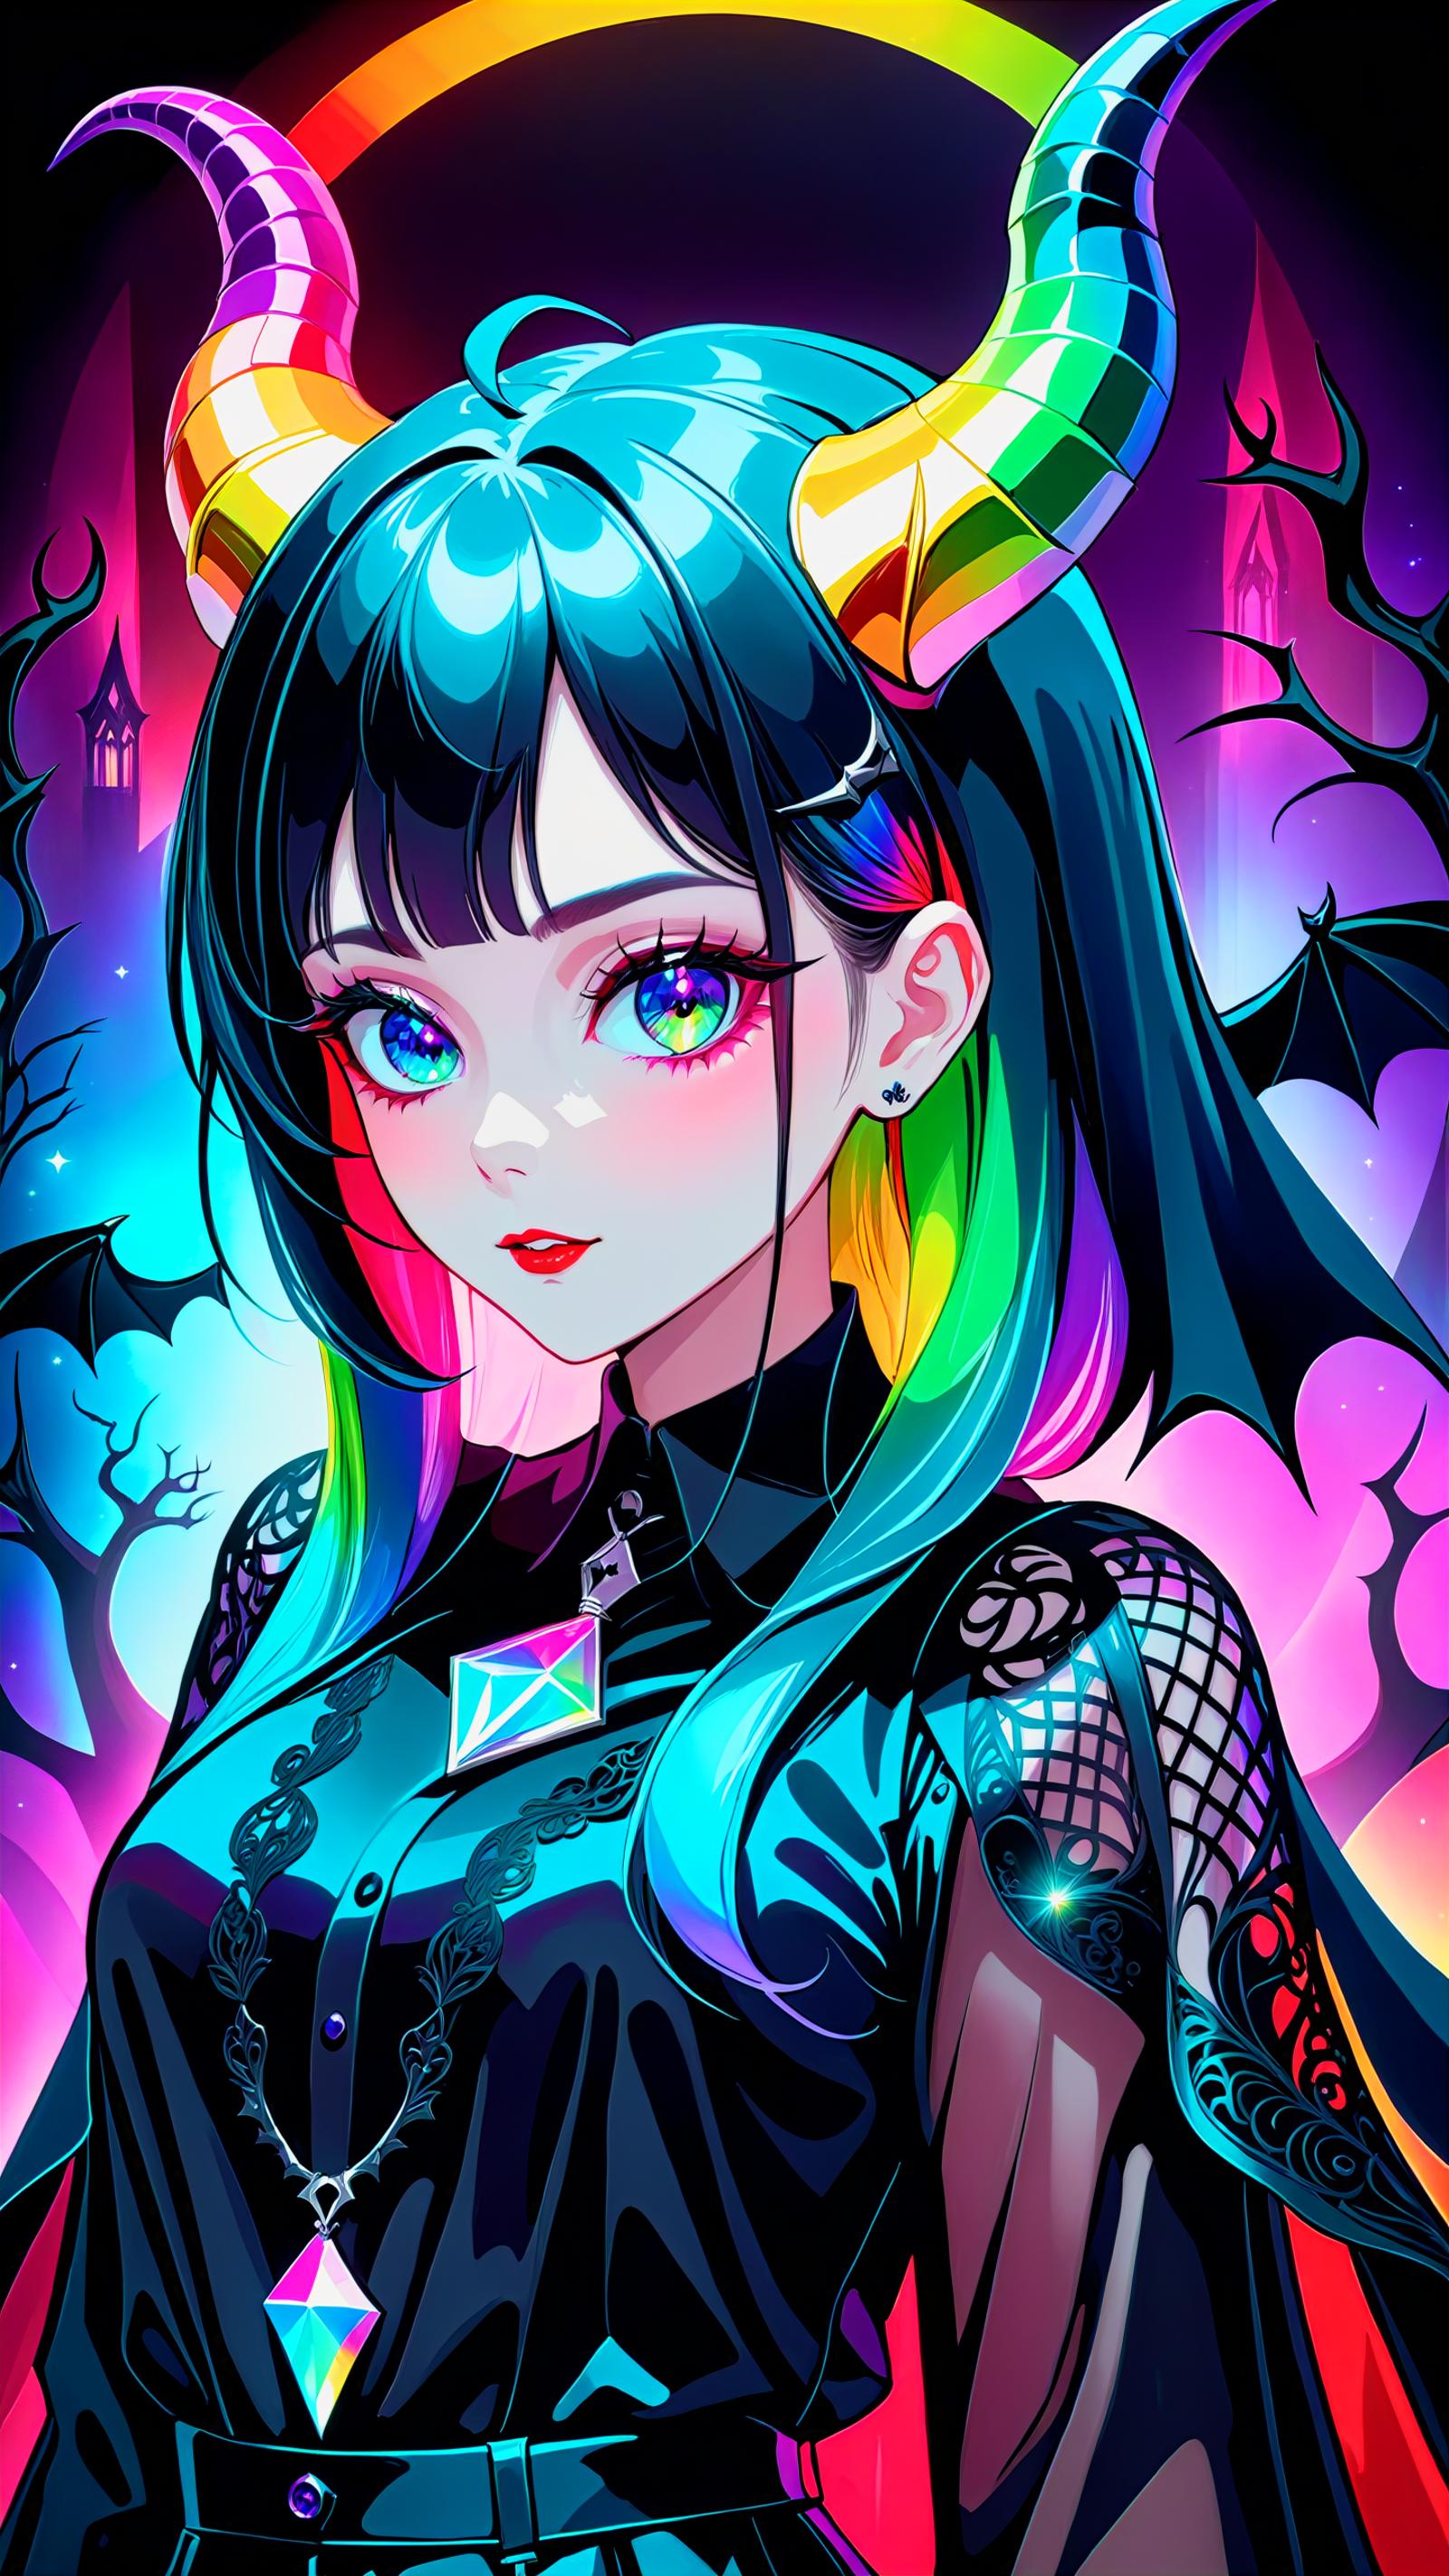 The image depicts a beautiful cartoon woman with blue eyes and blue hair, wearing a black dress. She has a unique appearance, possibly inspired by anime or manga culture, and is adorned with a bow on her head. The woman is positioned in front of a vibrant, colorful background that adds to the overall visual appeal of the scene.